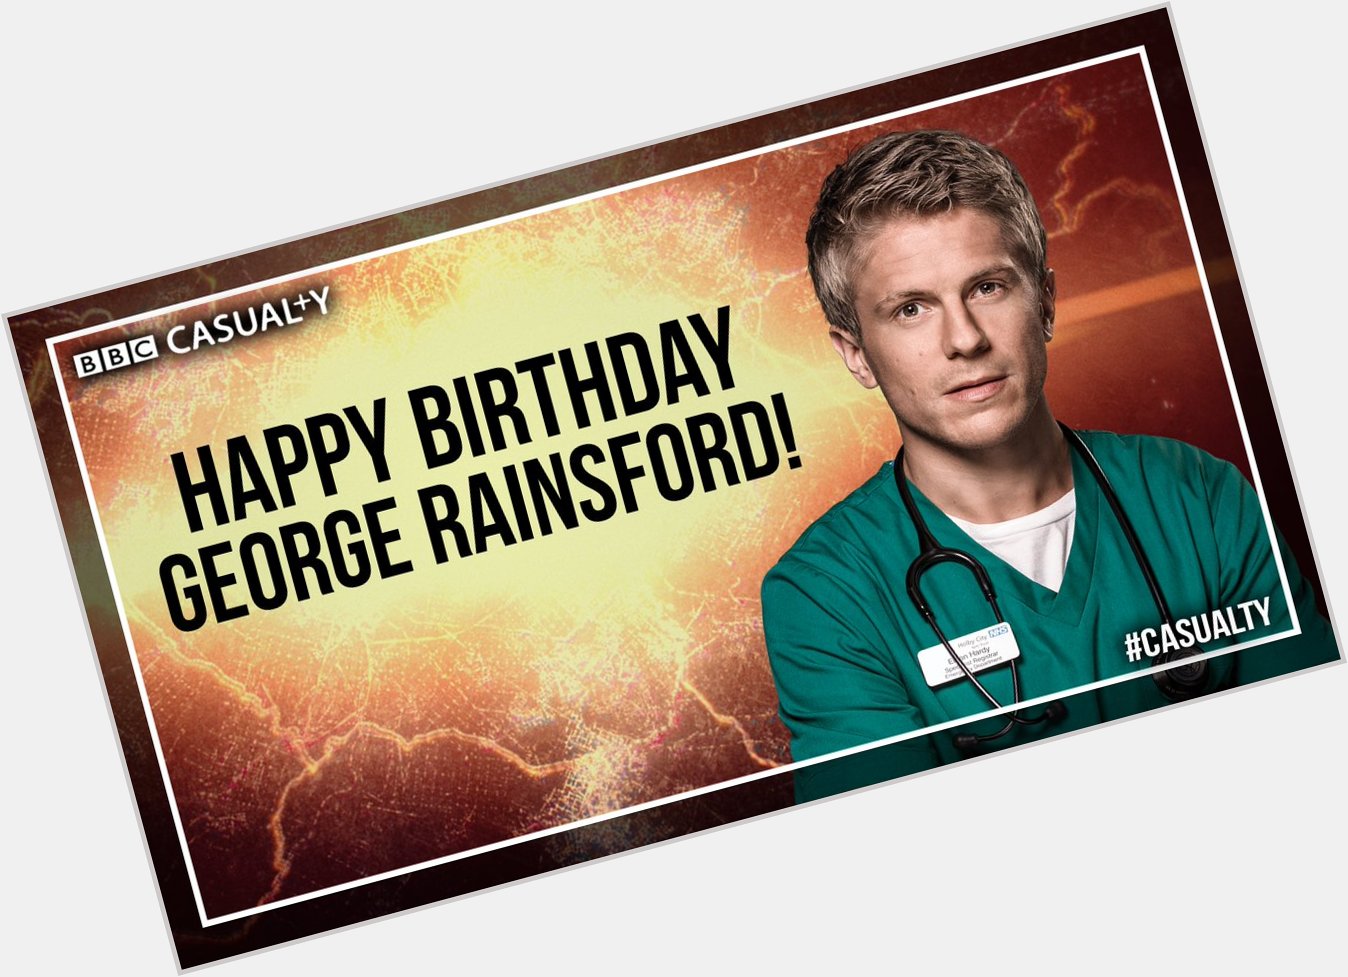 Join us in wishing George Rainsford, Holby s own Ethan Hardy, a very Happy Birthday!  